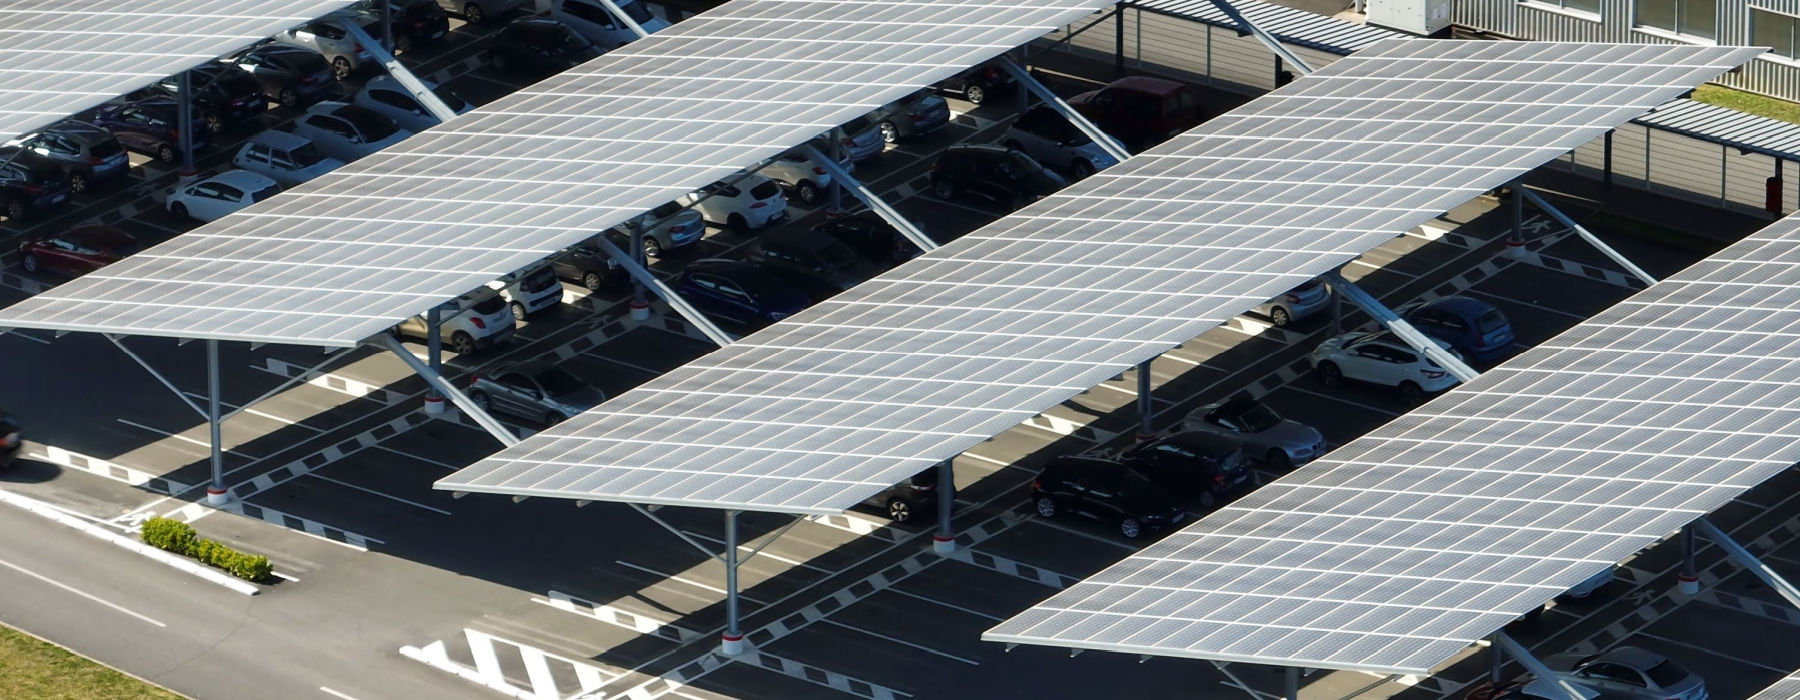 The 3 Energy Metering Options for Commercial Solar PV